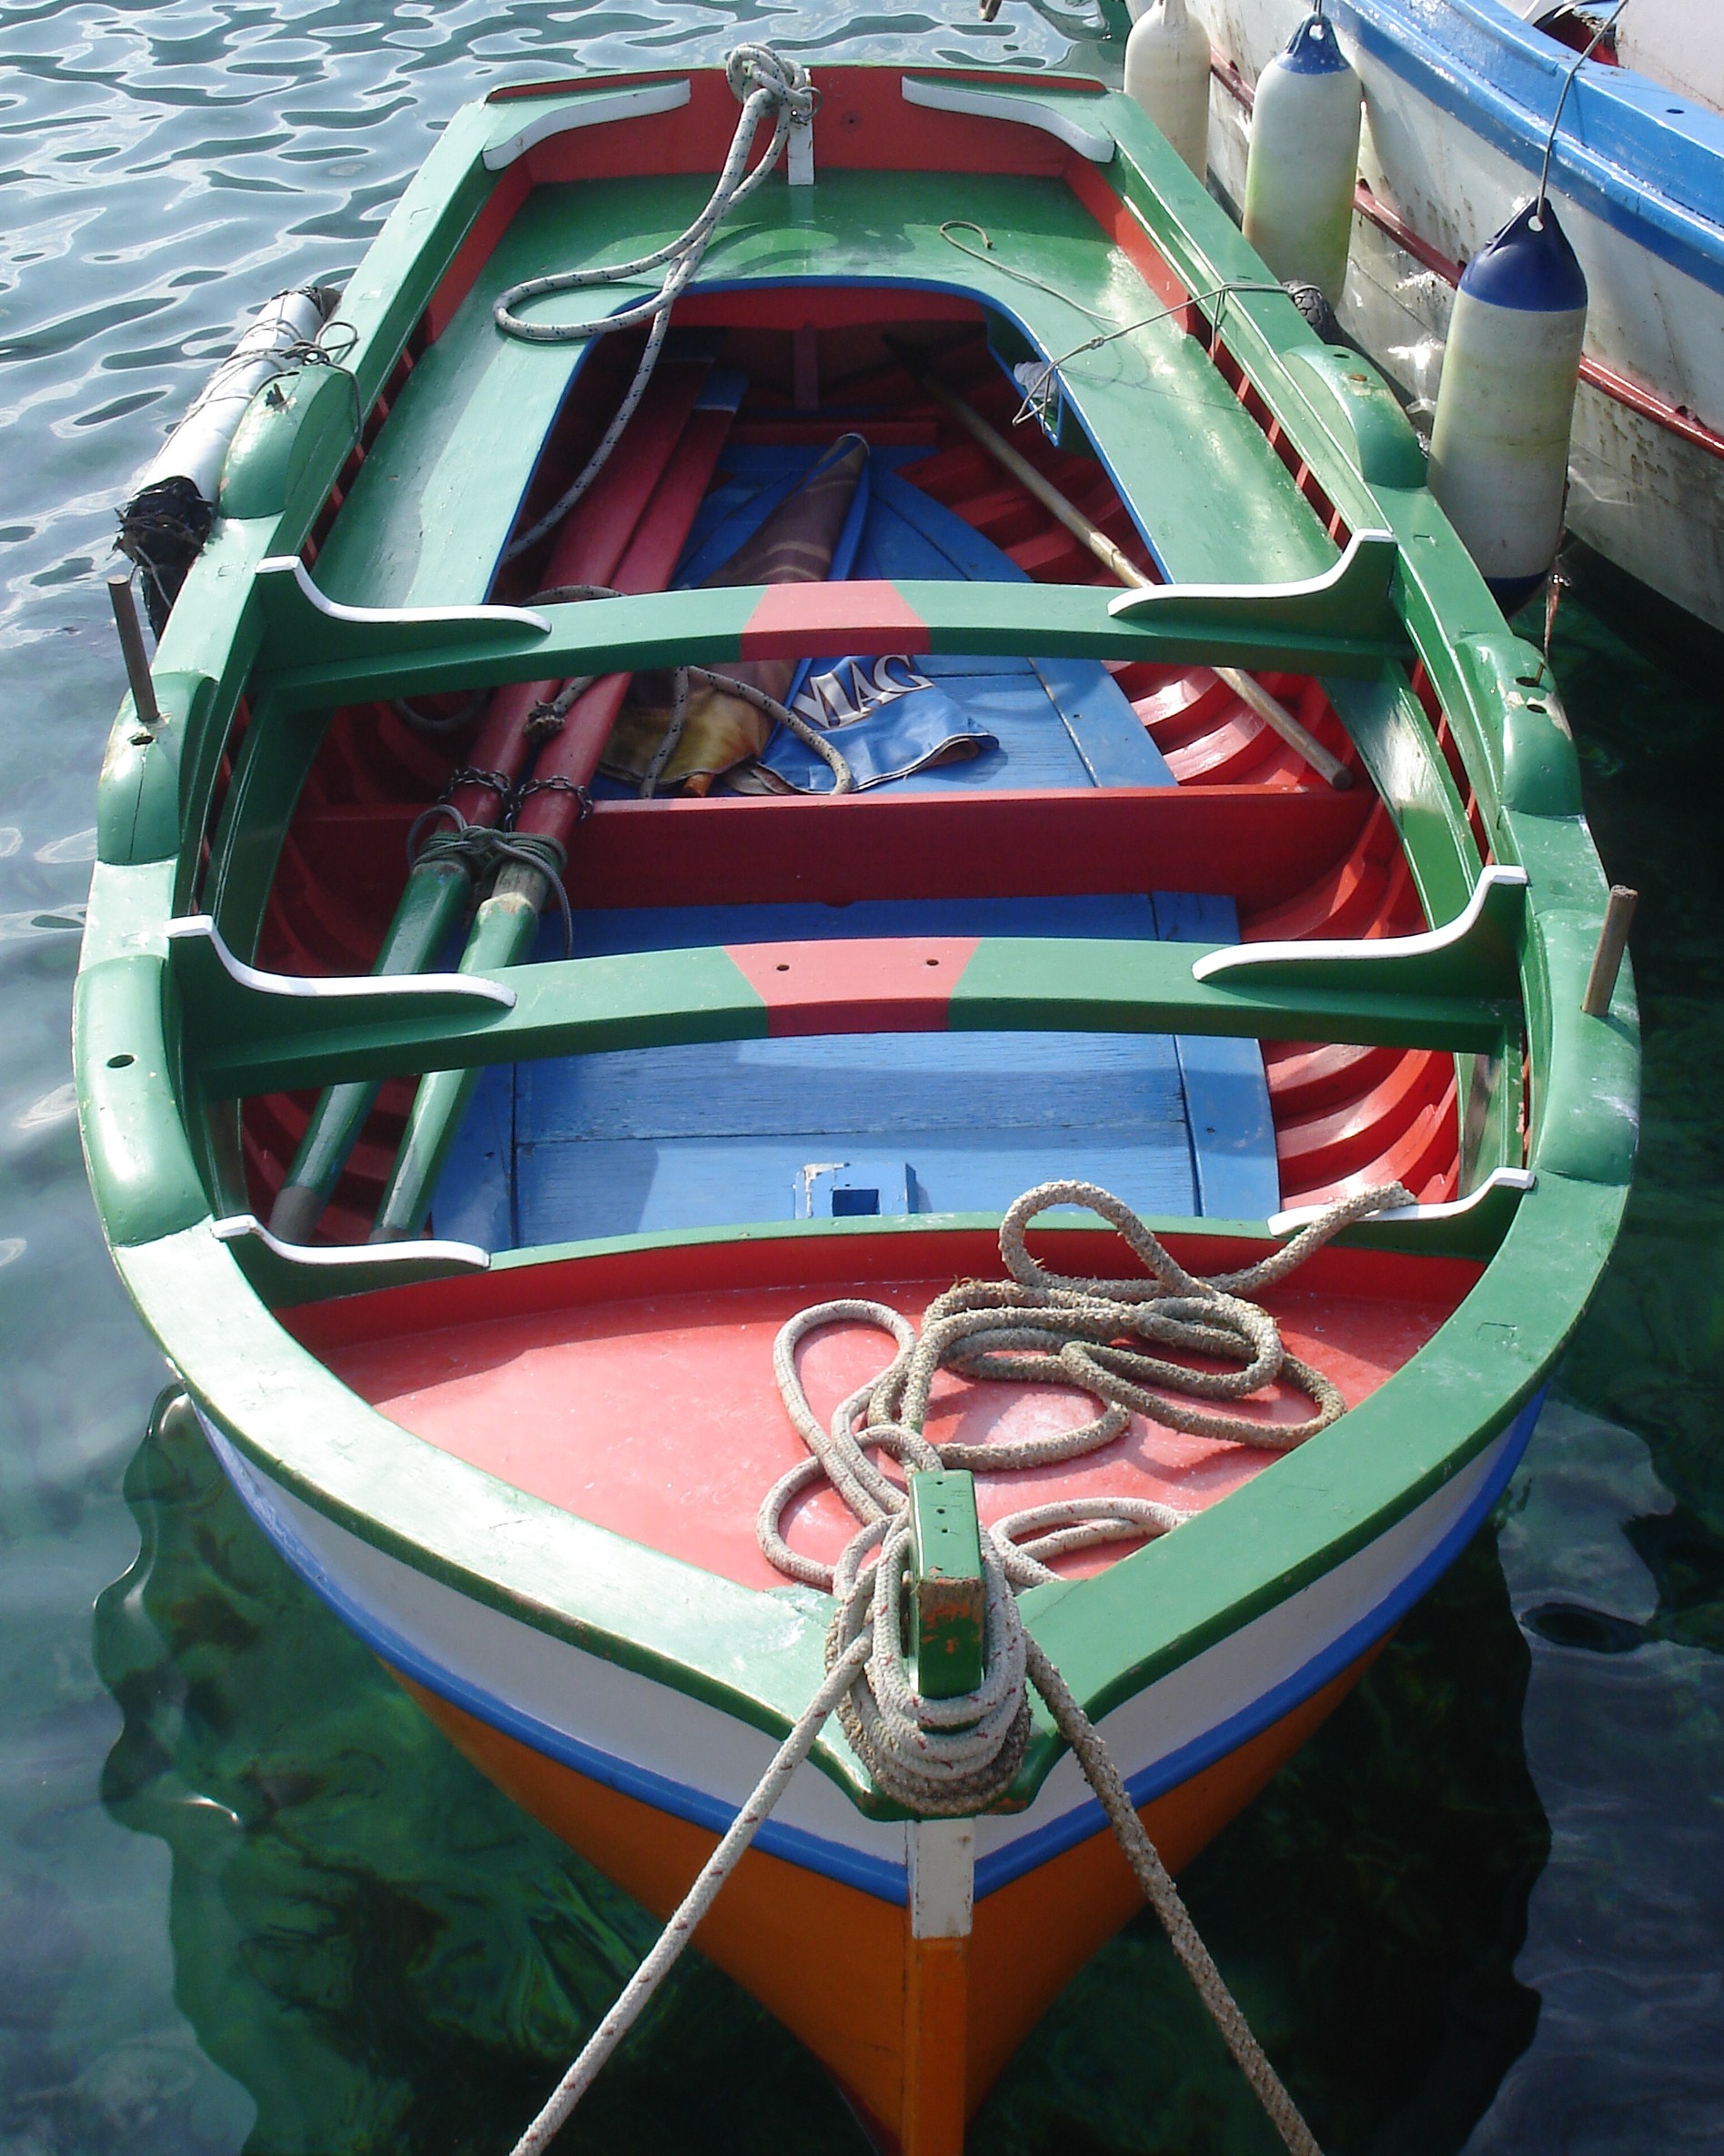 A SICILIAN ODYSSEY Director Jenna Maria Constantine's favorite and beloved Sicilian boat, discovered on location in Sferracavallo, Sicily